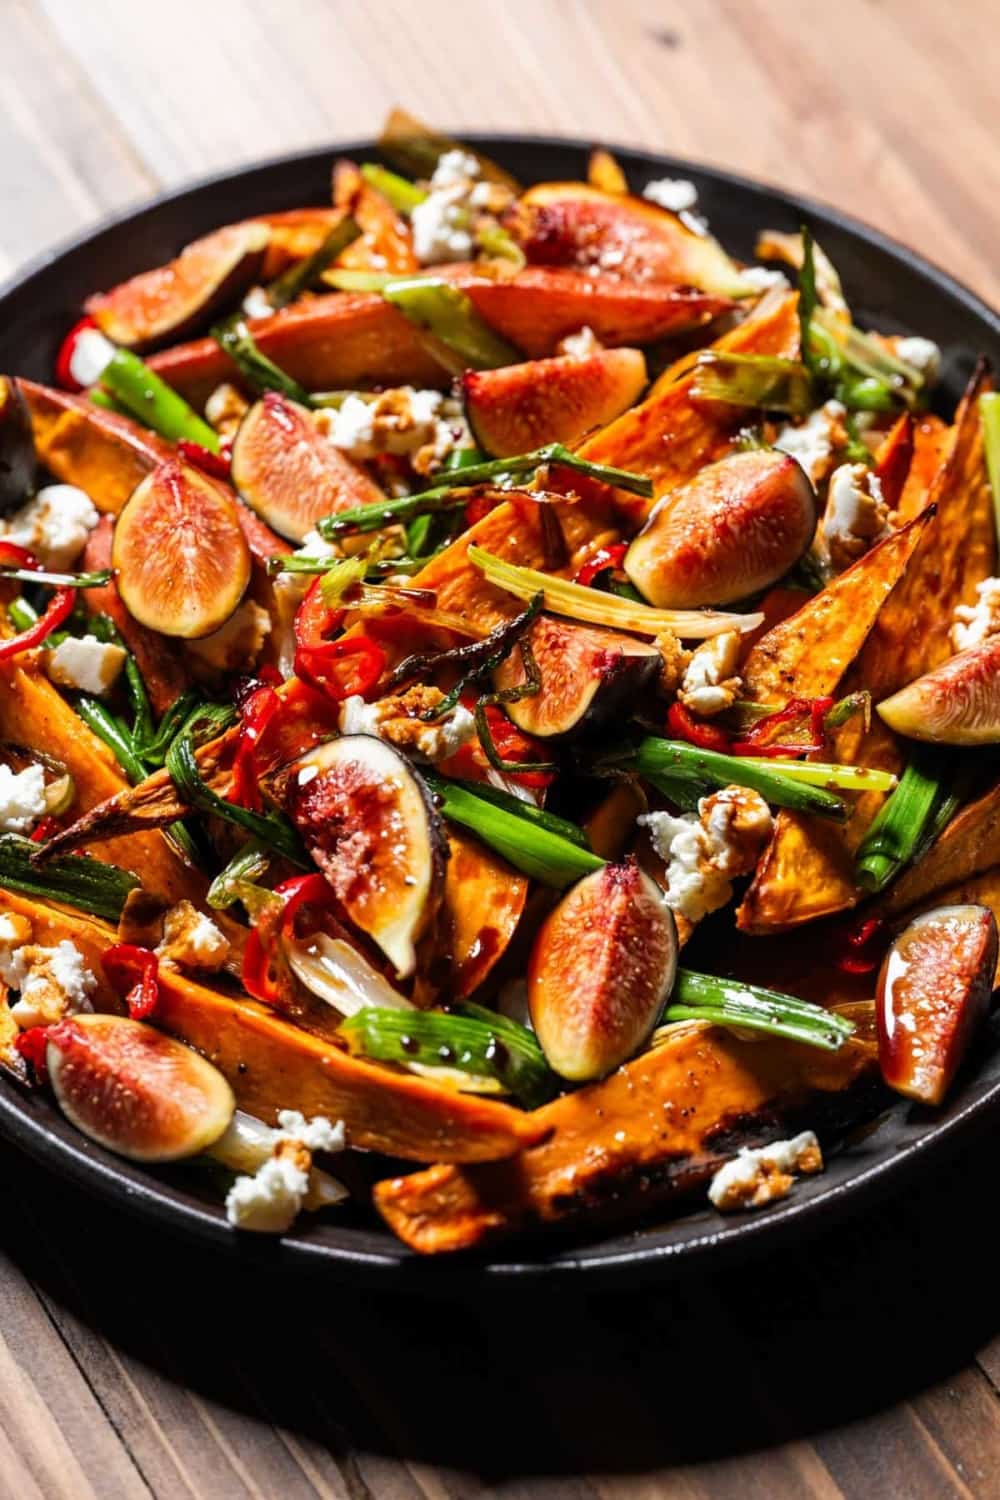 Roasted Sweetpotatoes with Figs